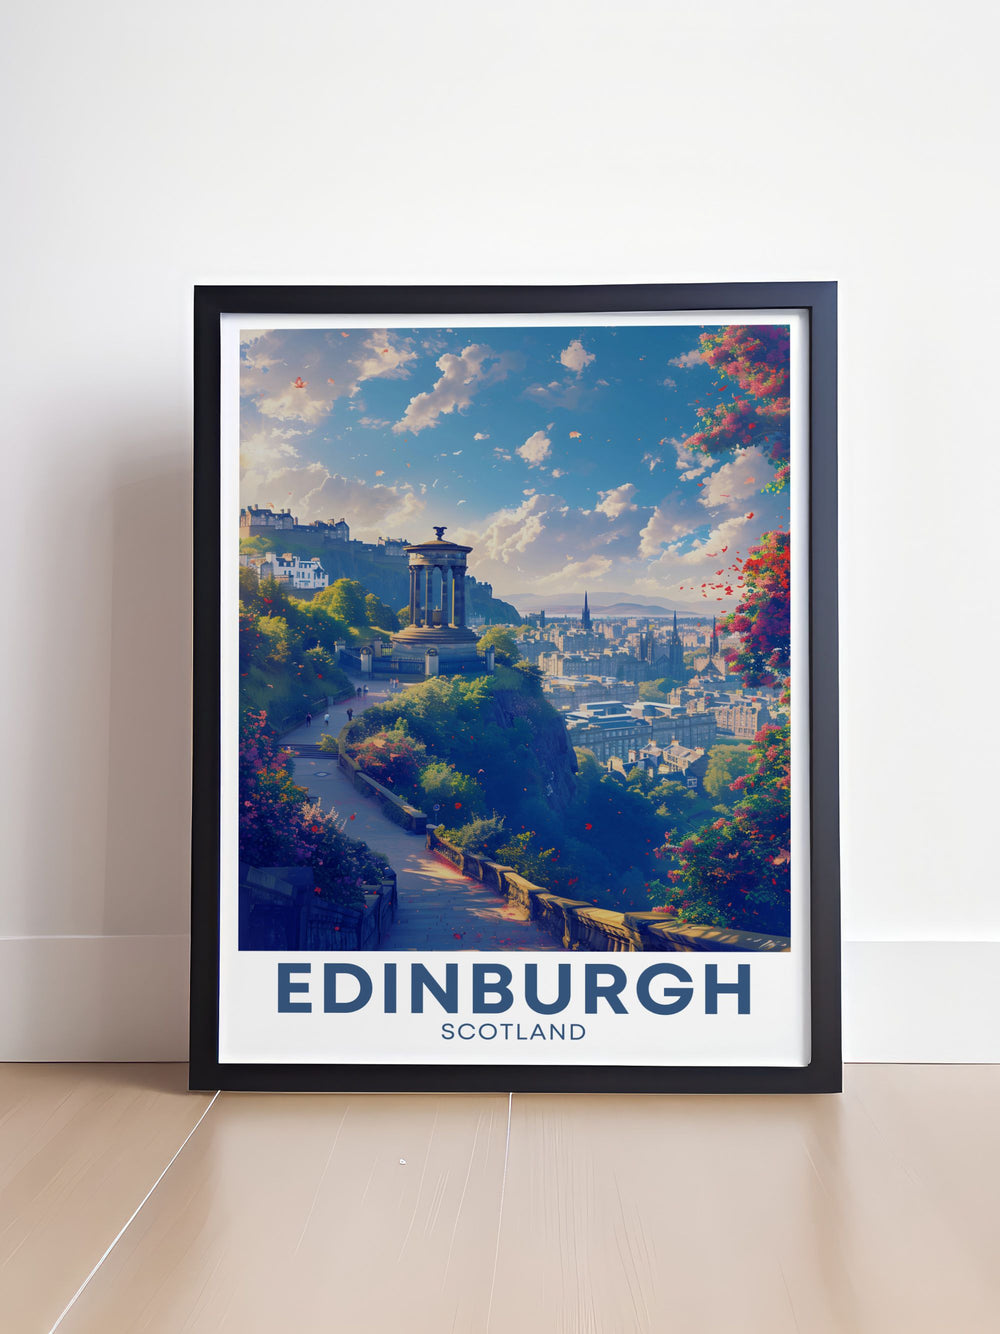 Framed art capturing the majestic view from Calton Hill, emphasizing the natural splendor and historic essence of Edinburgh.